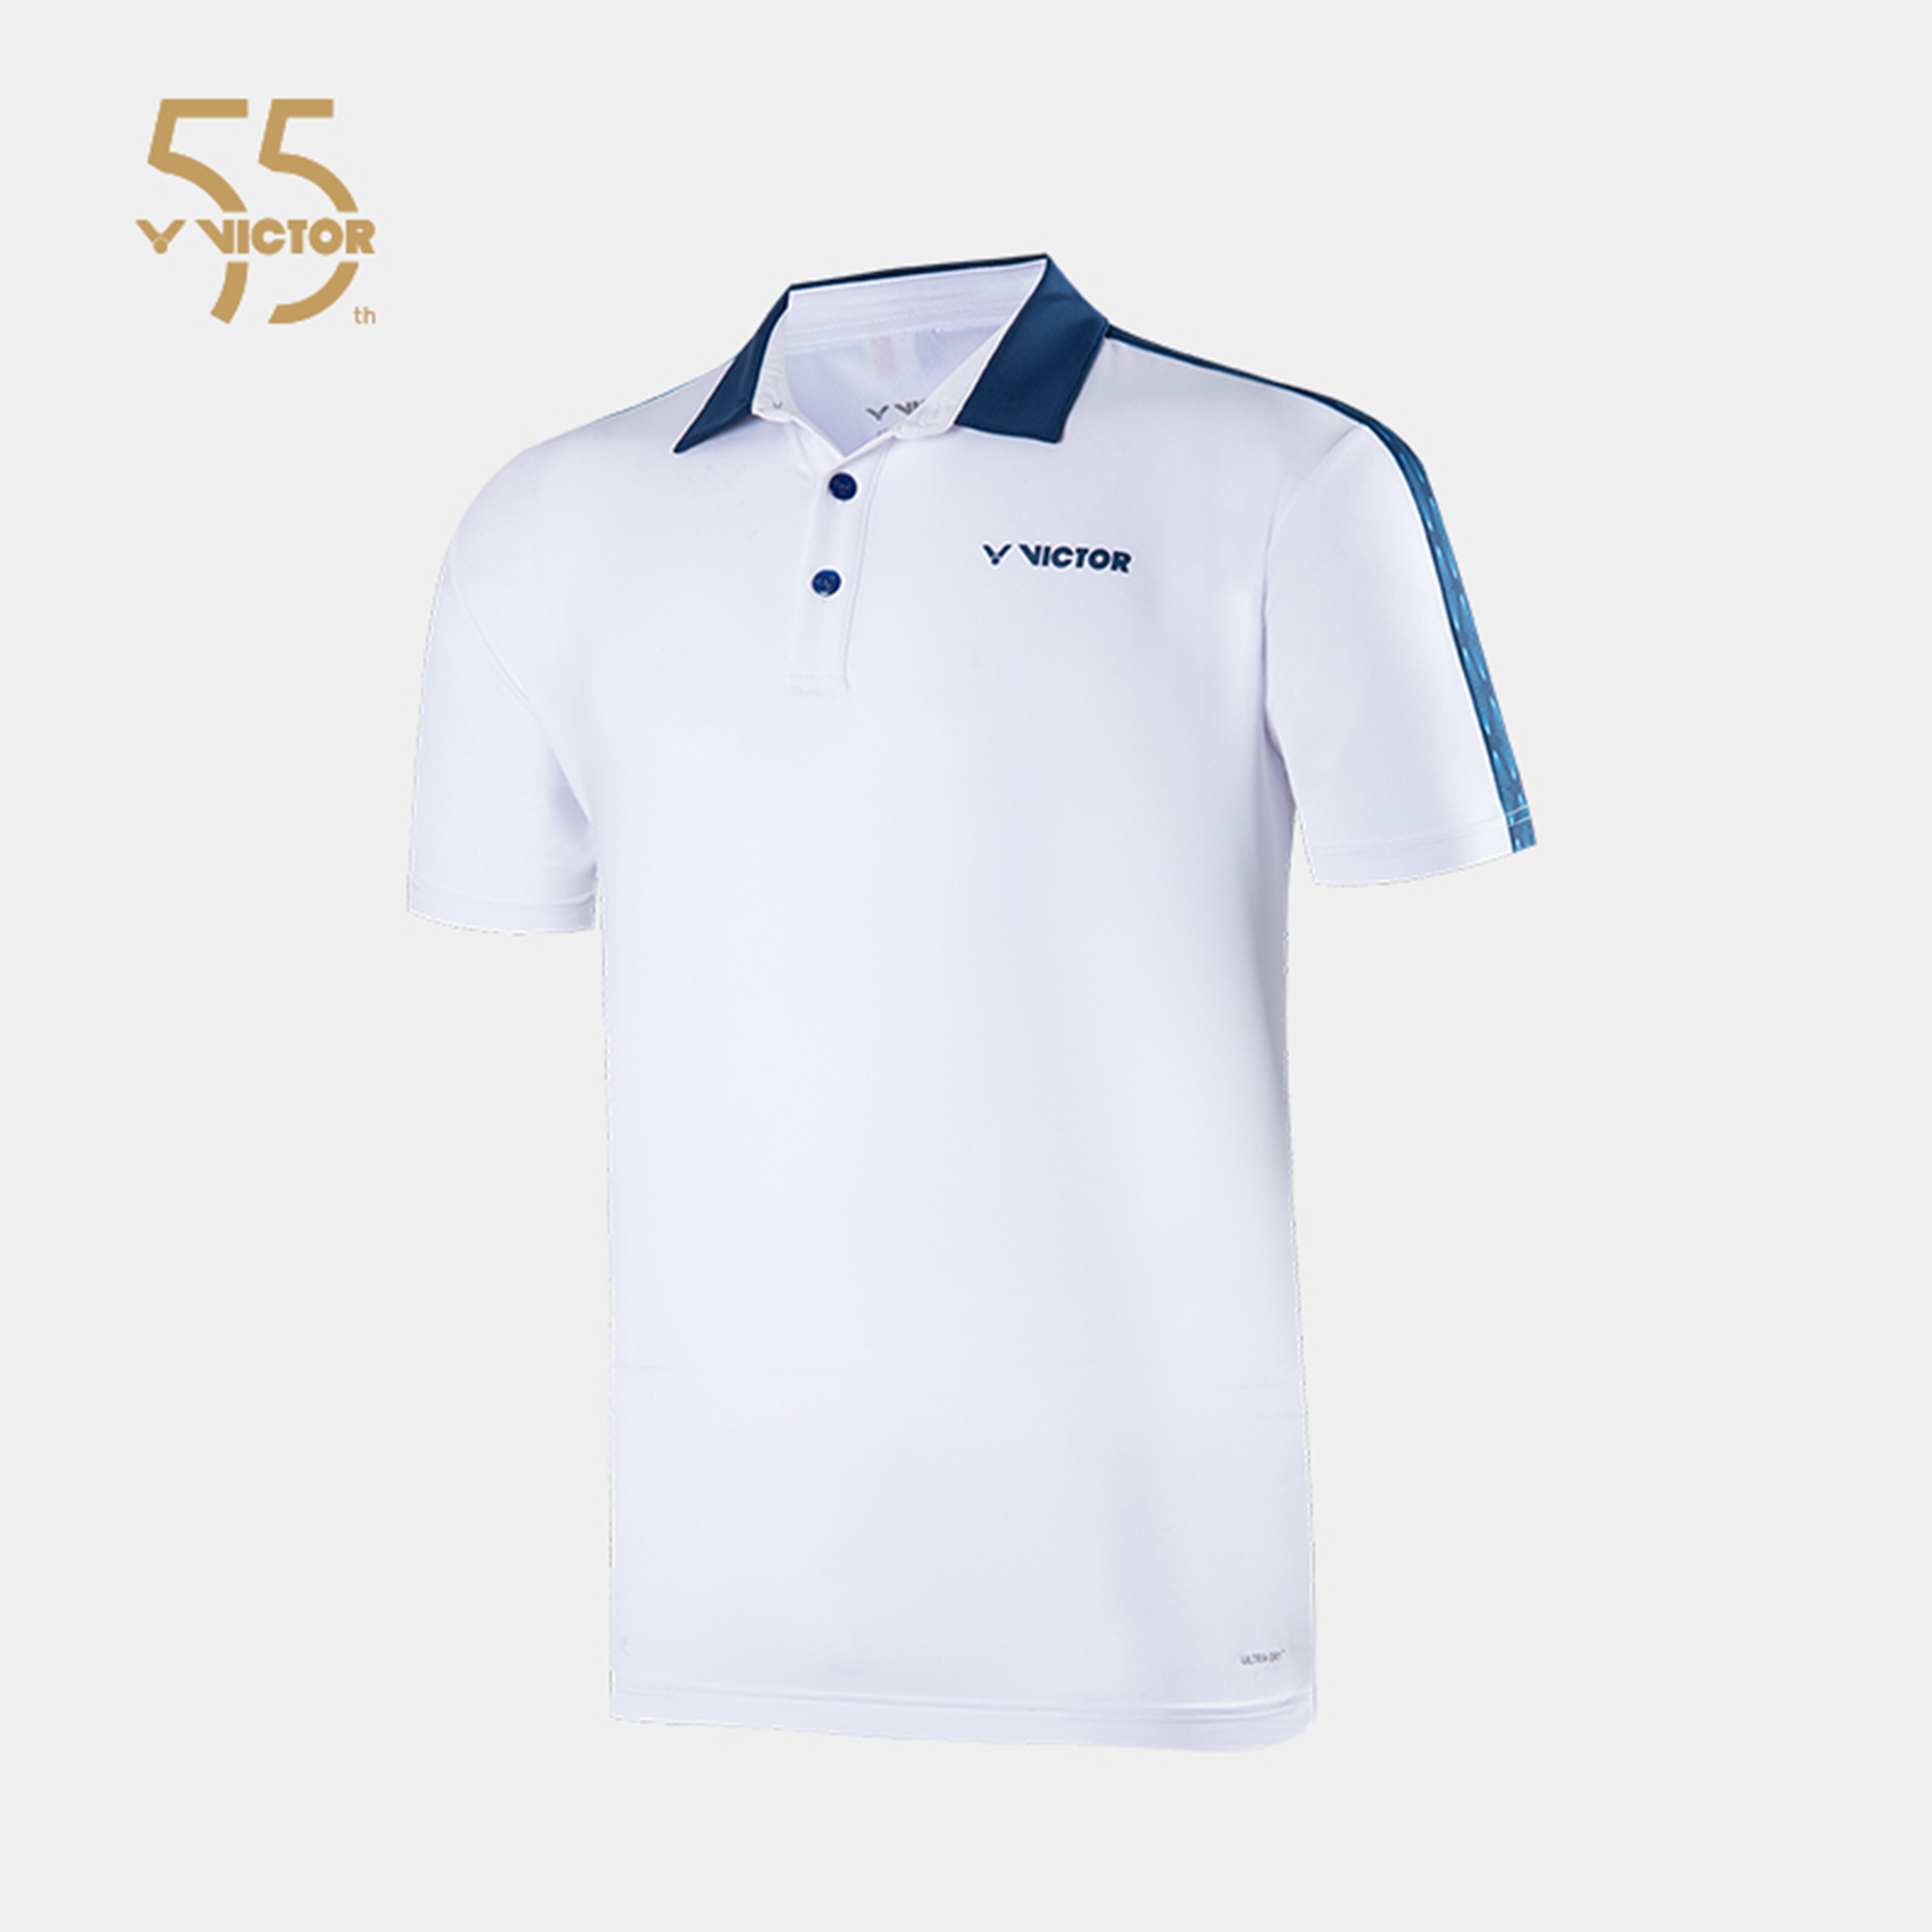 Victor 55th Anniversary Edition S-5502A Premium Sports Polo Shirt White UNISEX (Clearance)